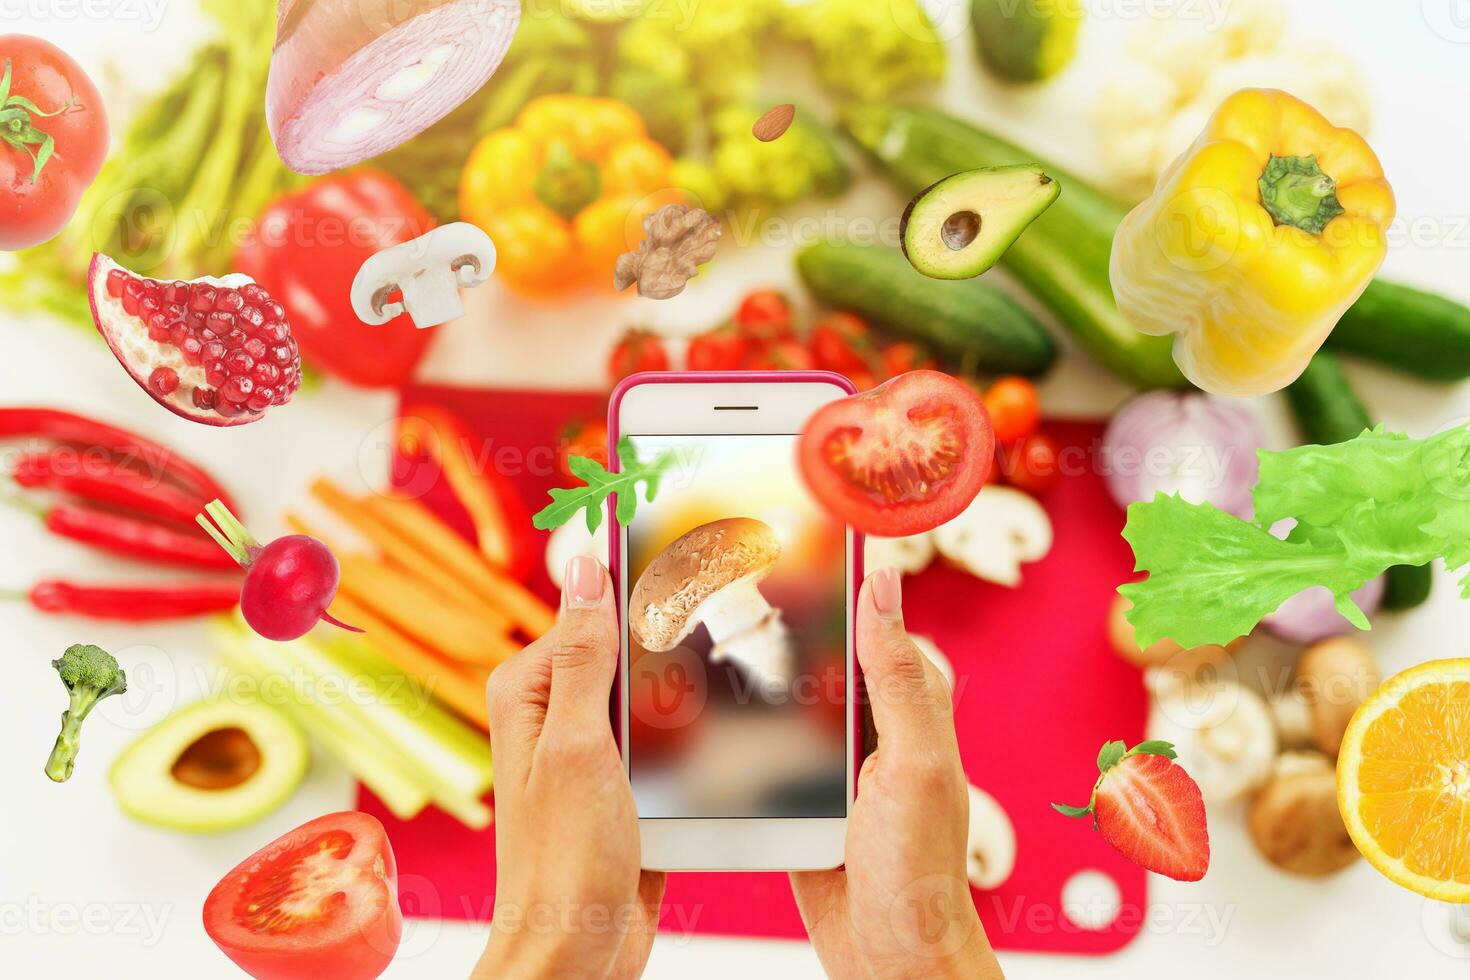 Cook follows a recipe of vegetables from the smartphone photo